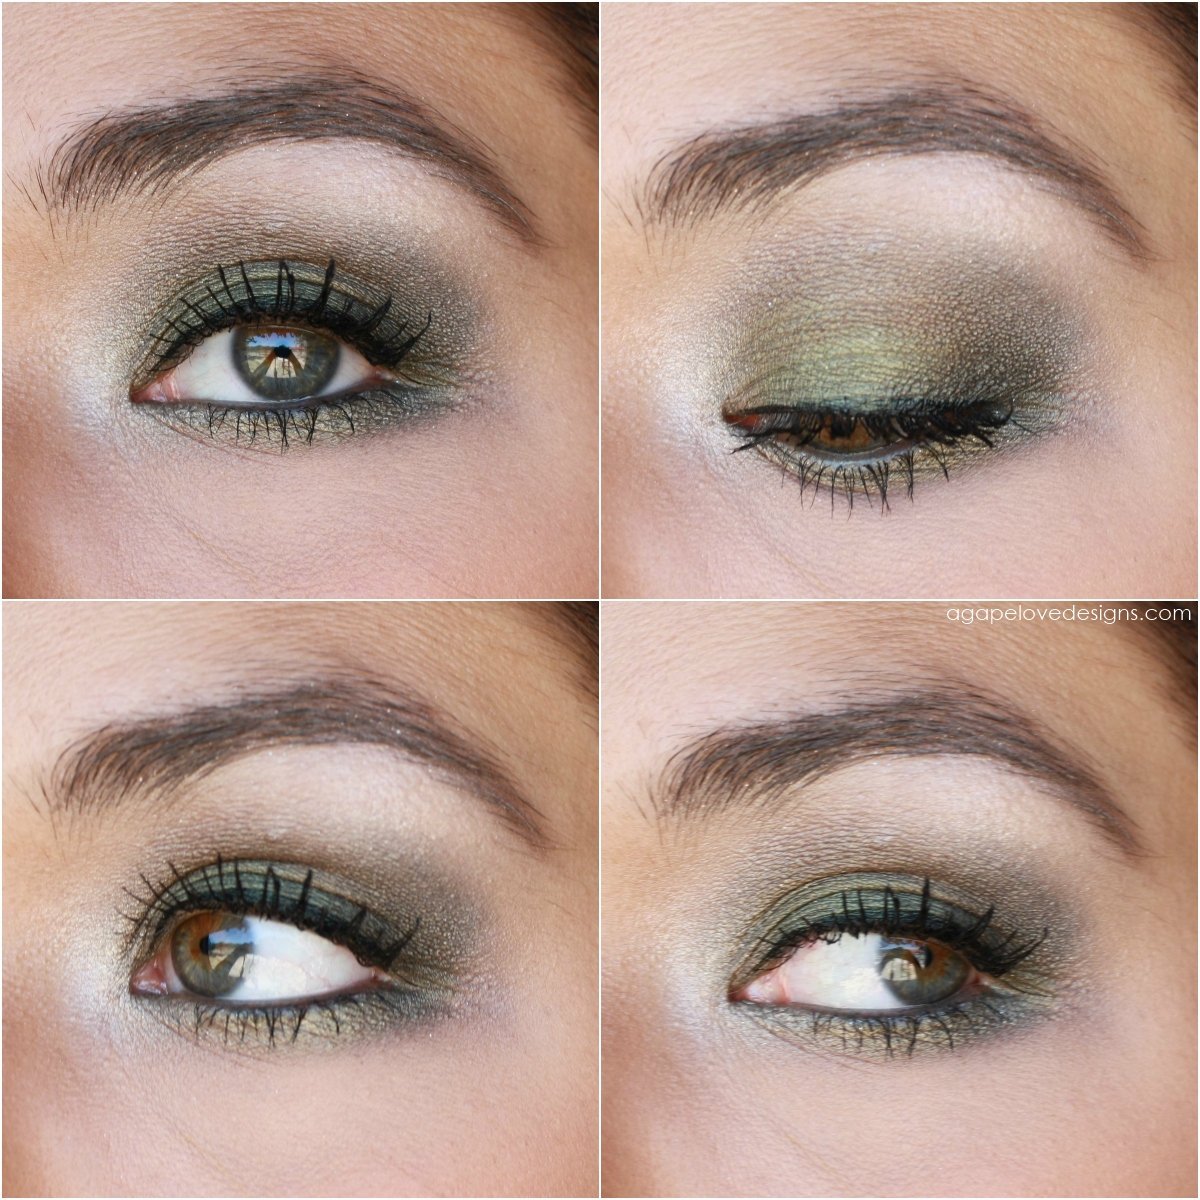 Agape Love Designs: EOTD With Urban Decay's Ammo Palette